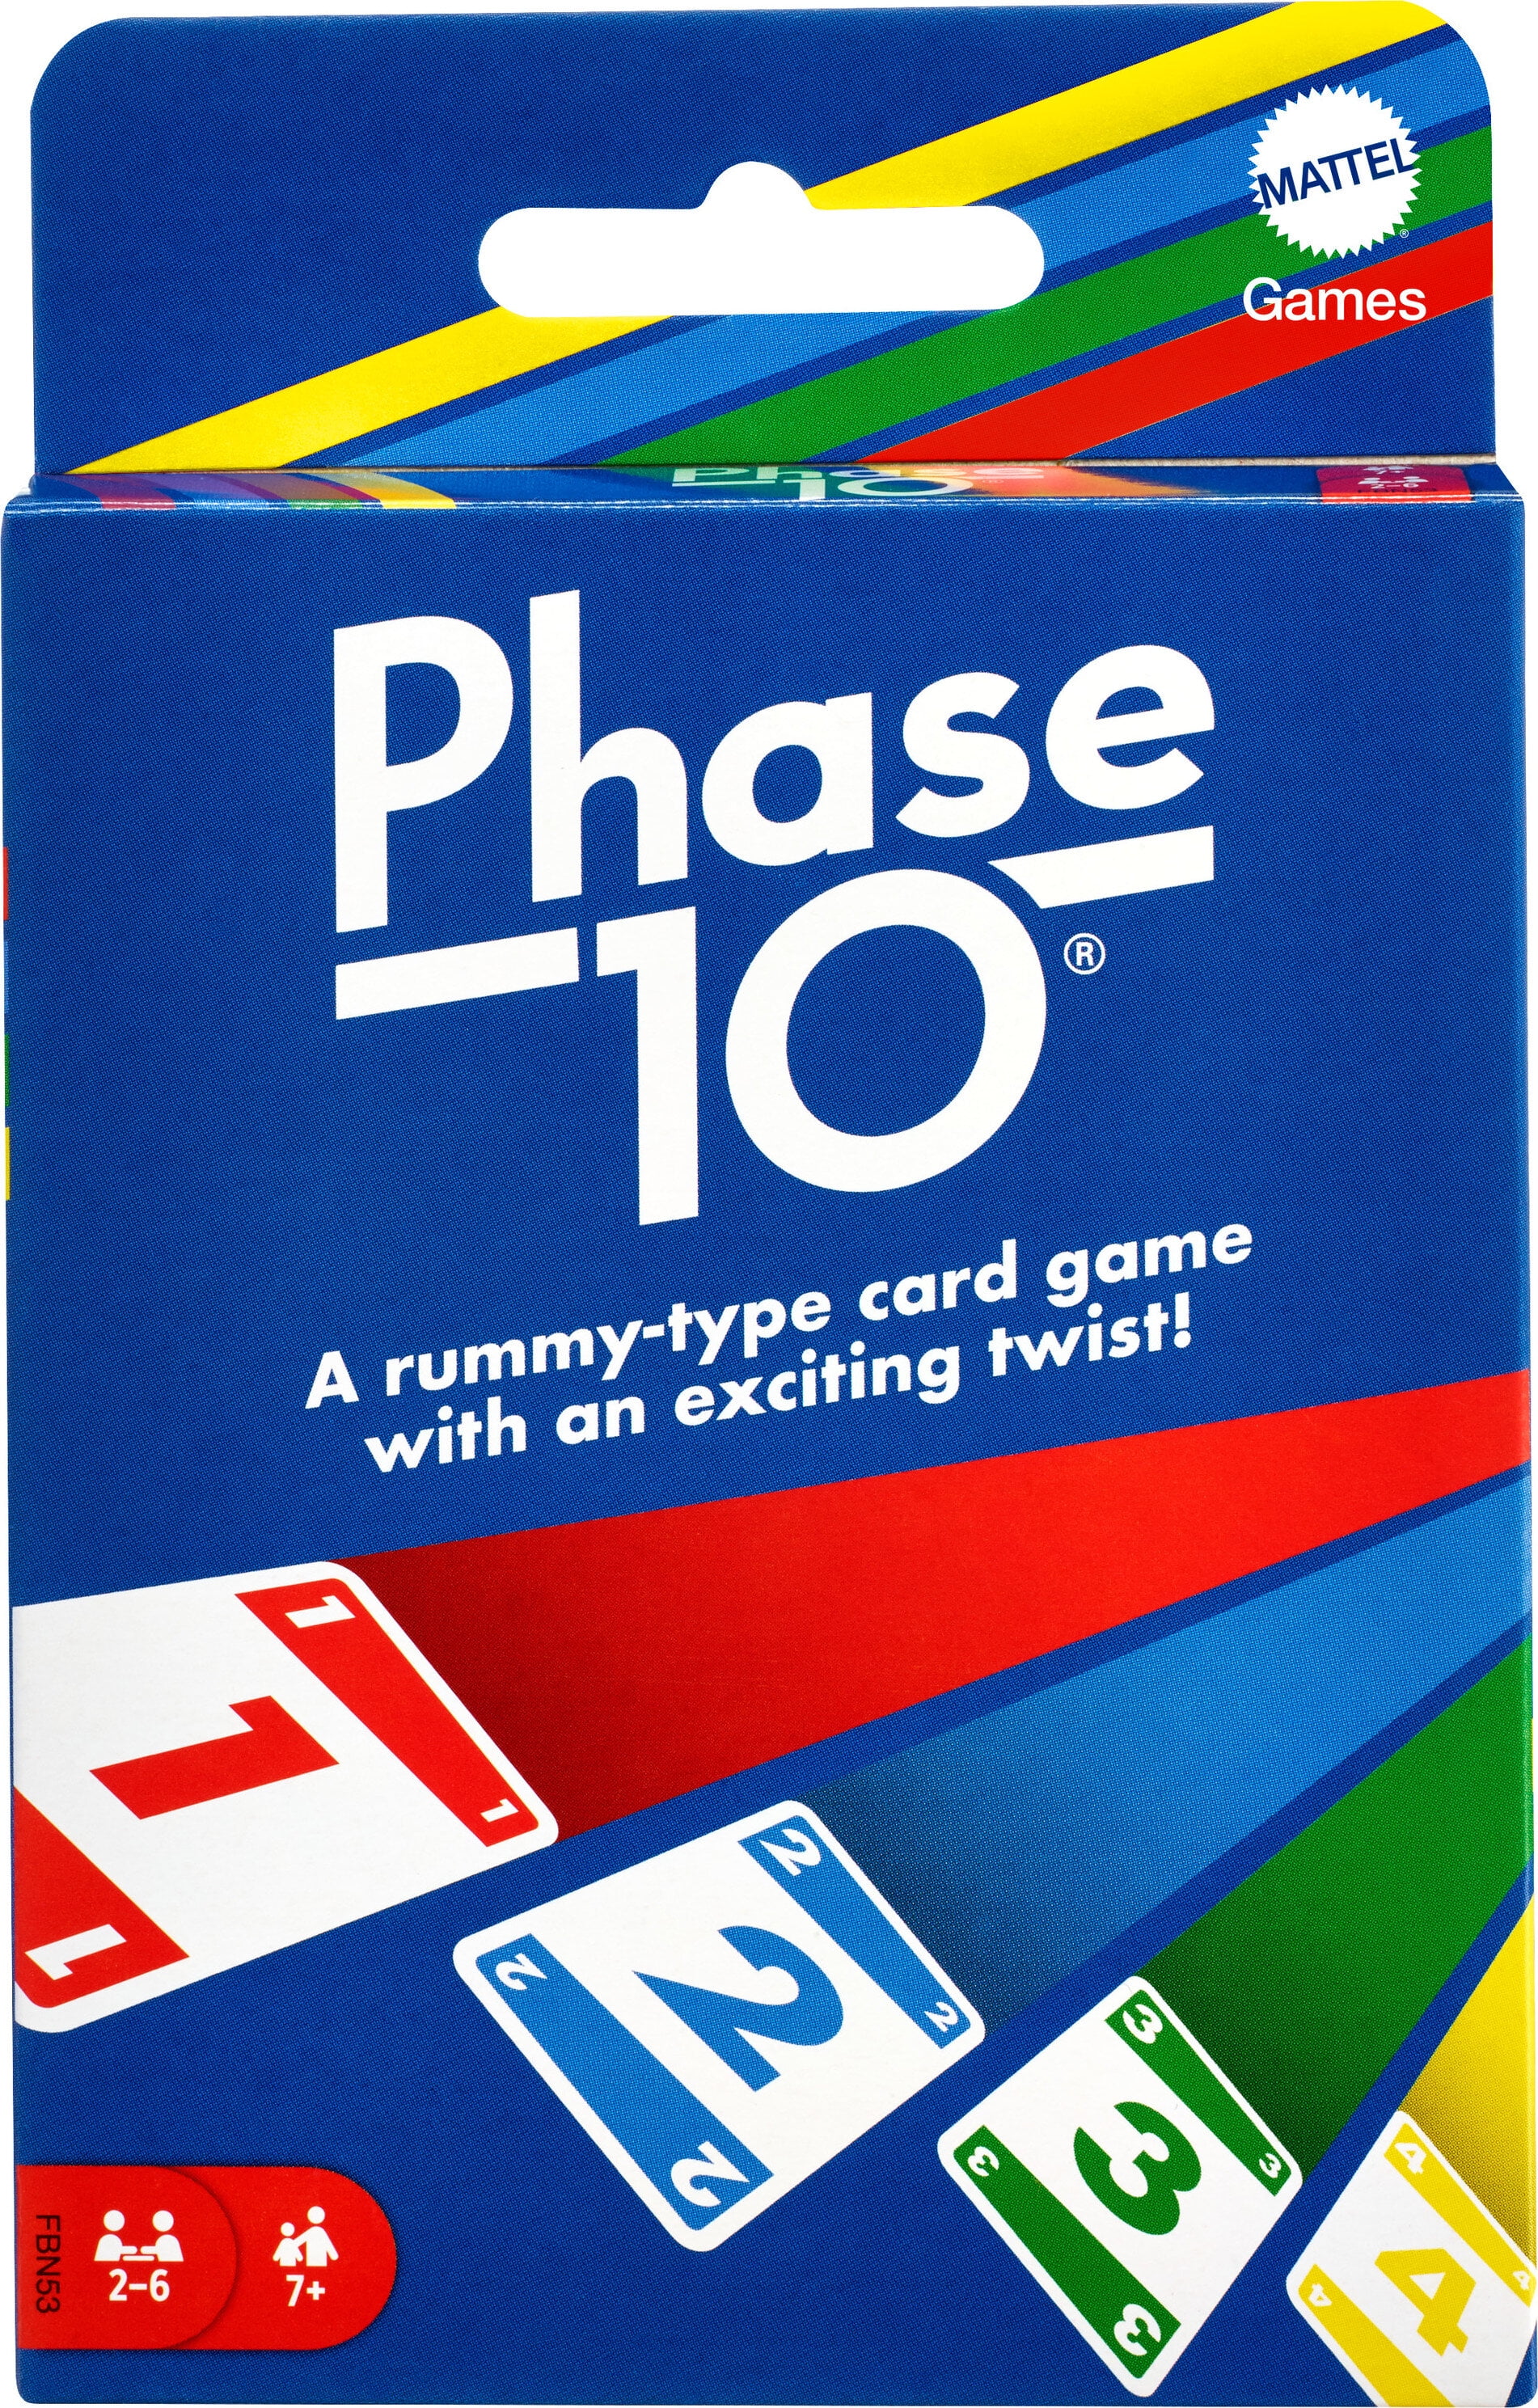 Phase 10 Card Game, Family Game for Adults & Kids, Challenging & Exciting Rummy-Style Play $6.44